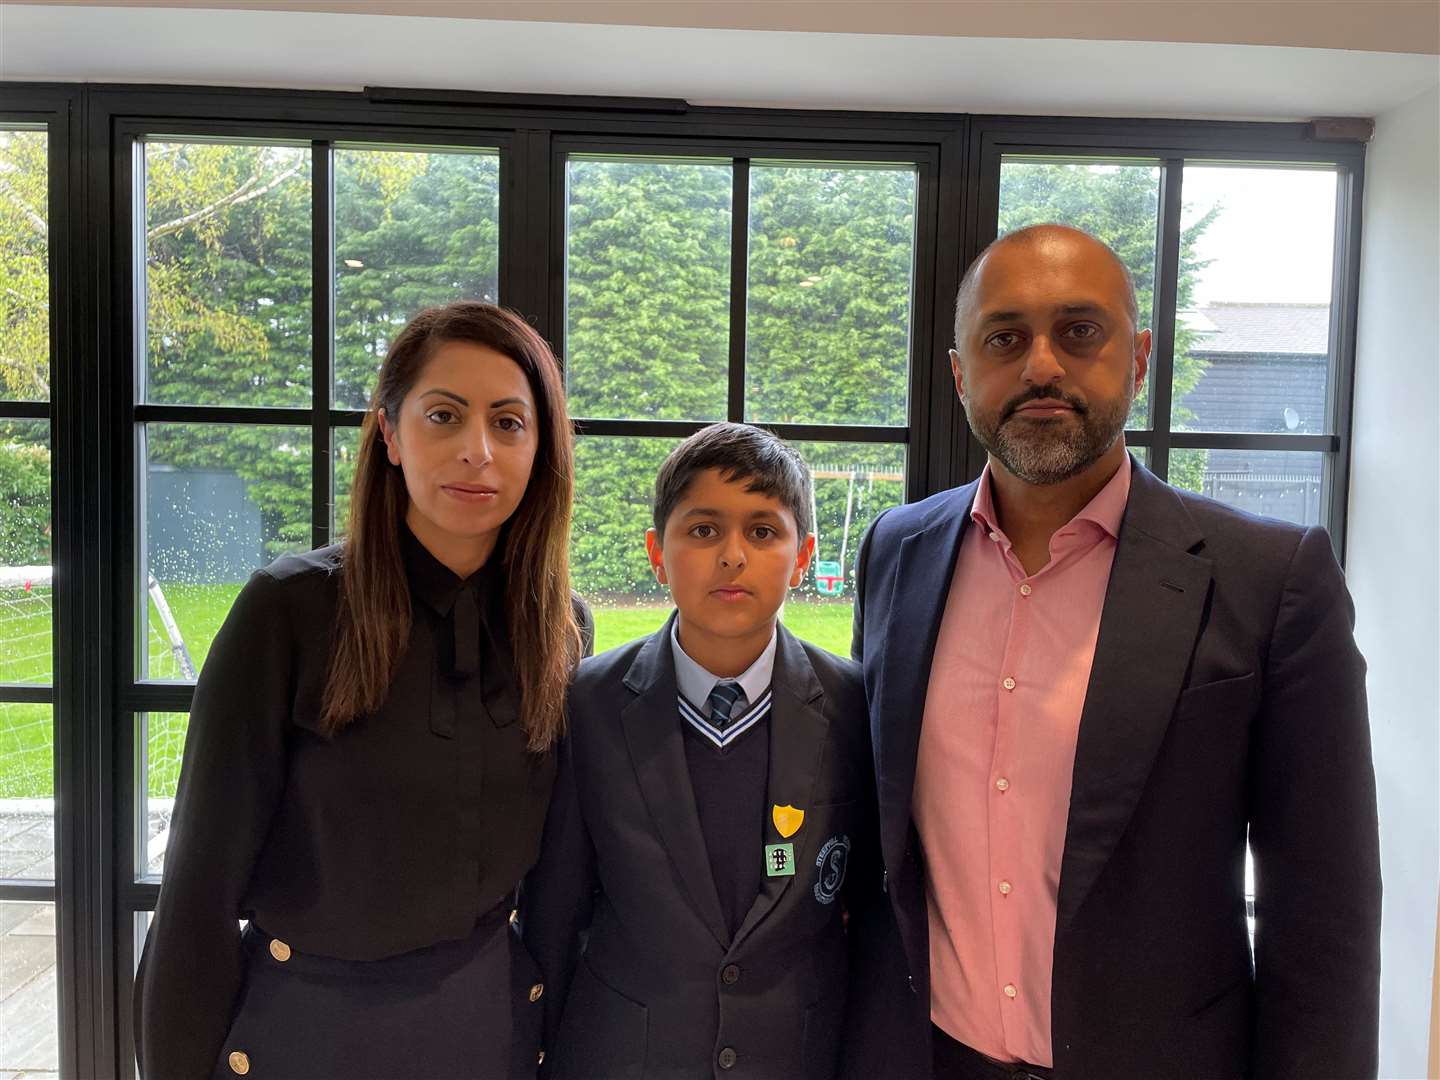 Joshua Shergill (middle) missed out on a grammar school place